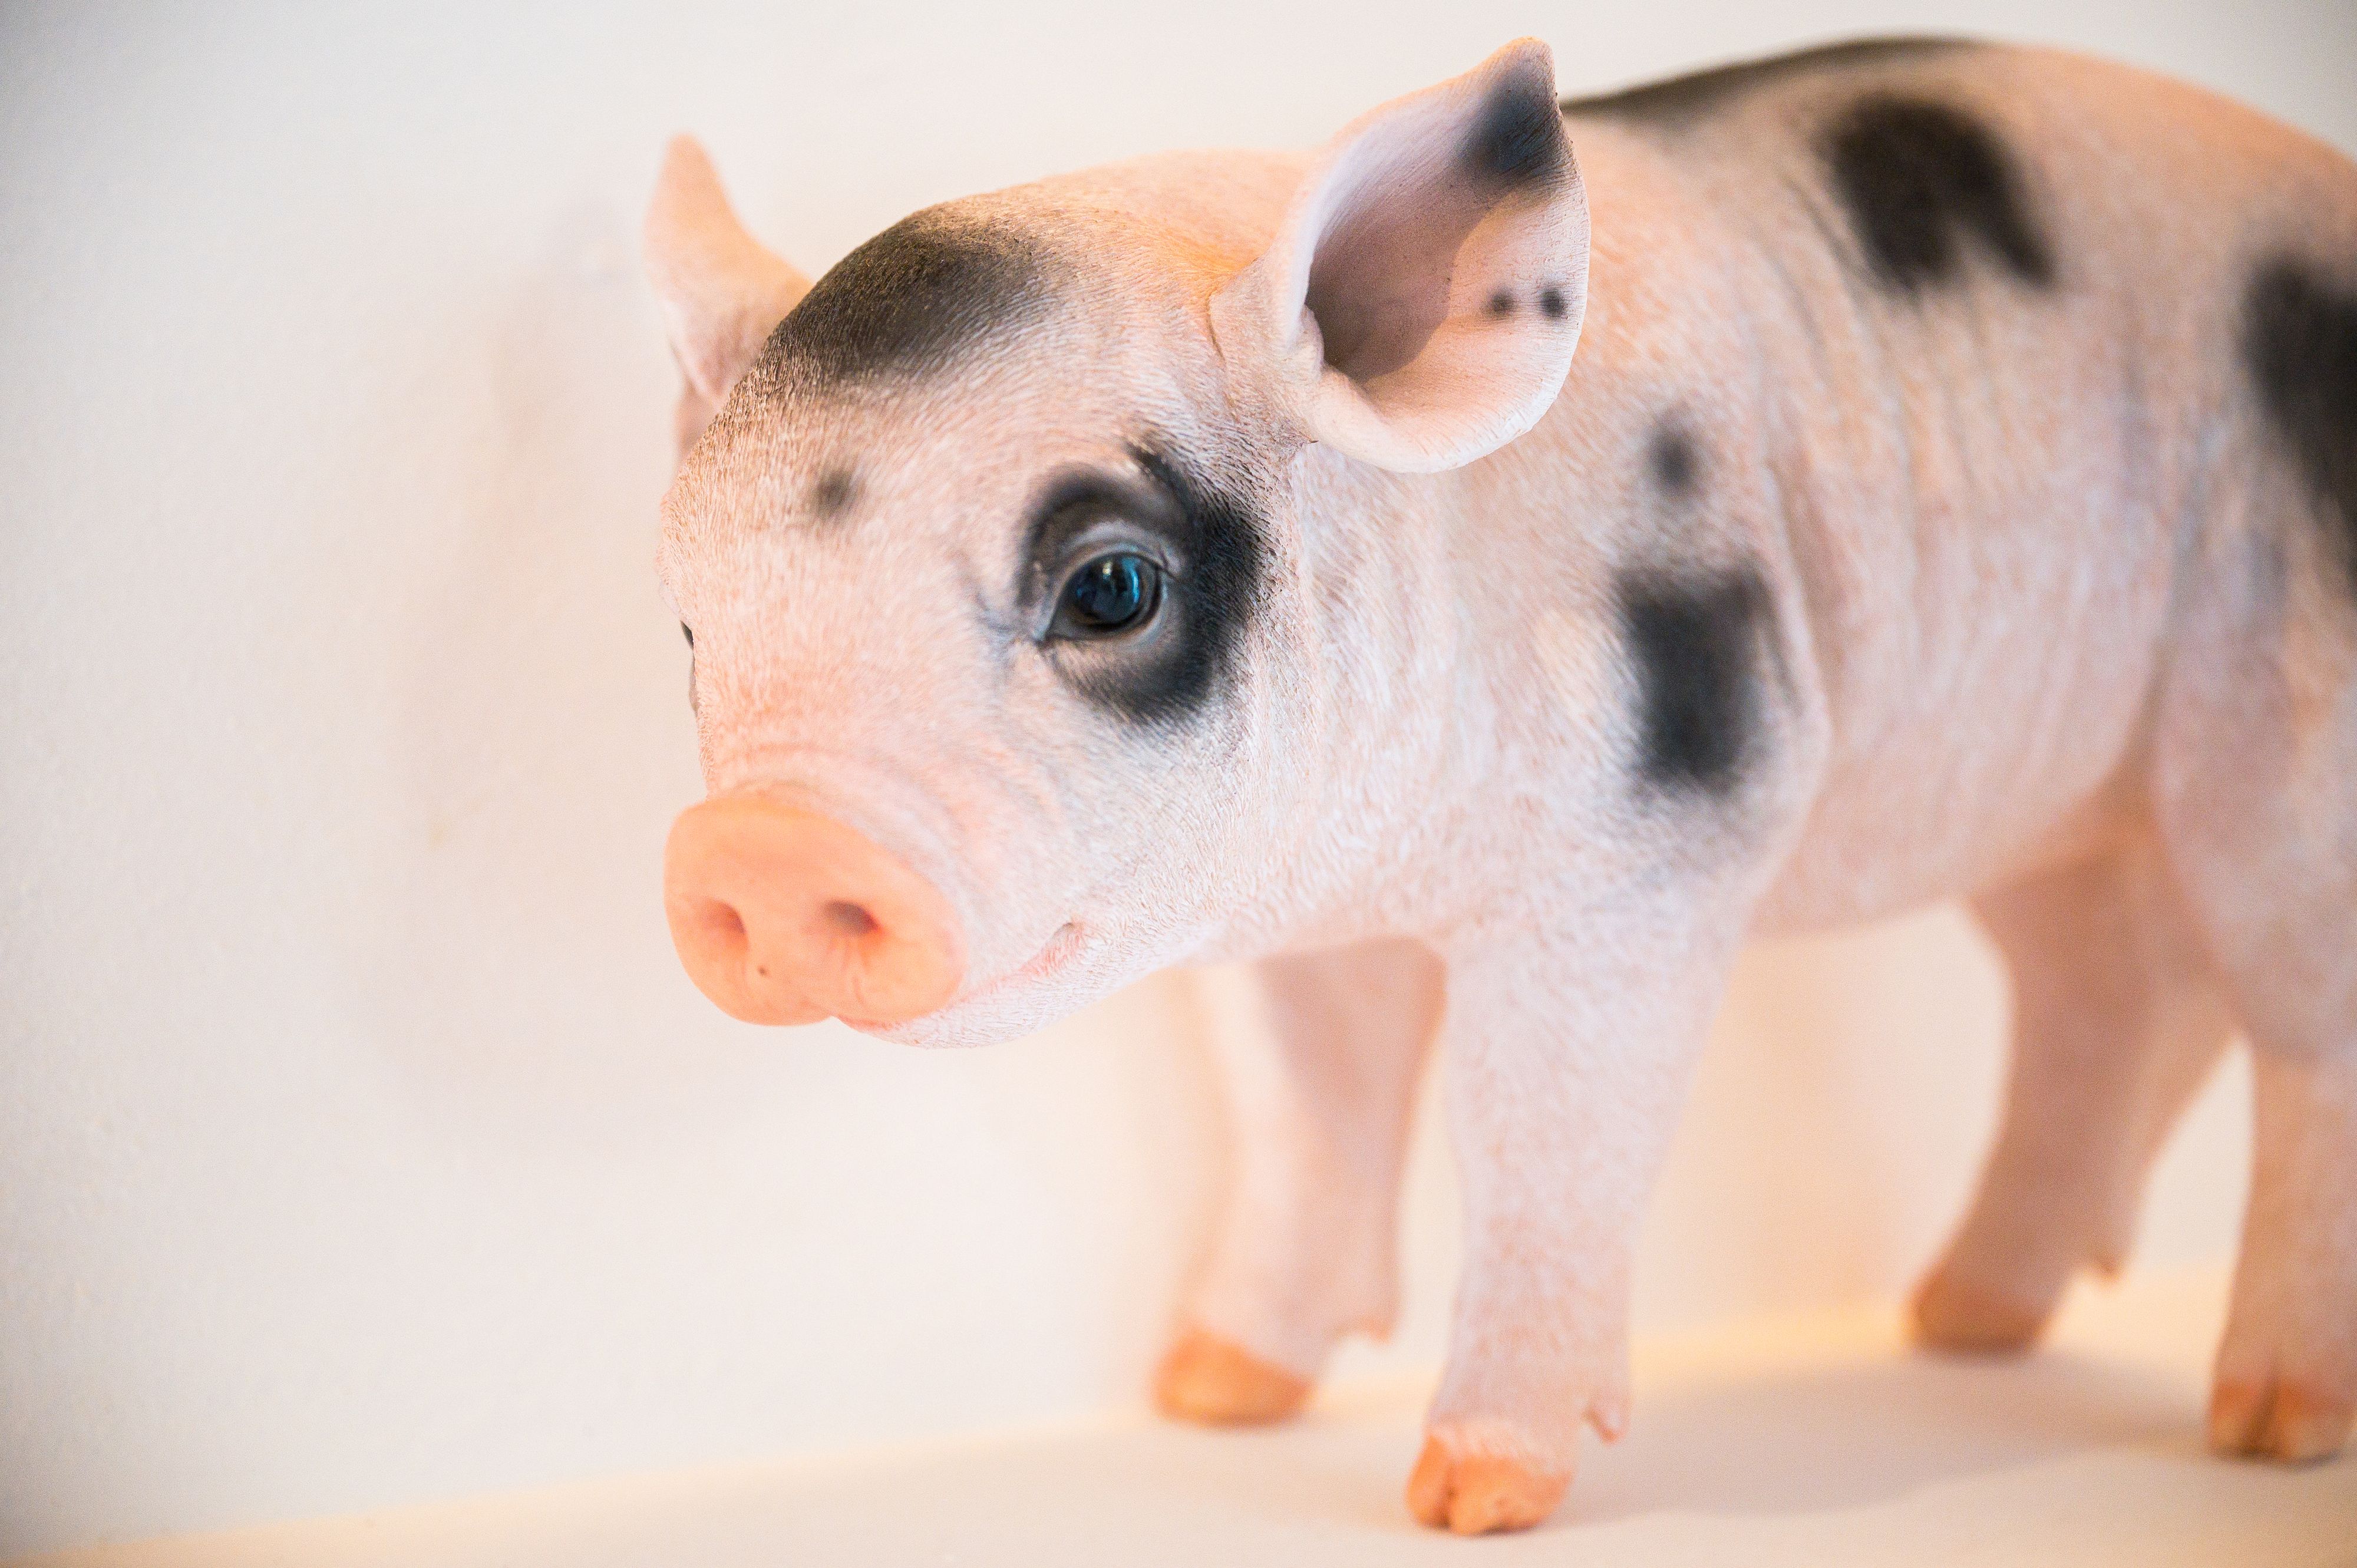 Small realistic toy pig in Portugal